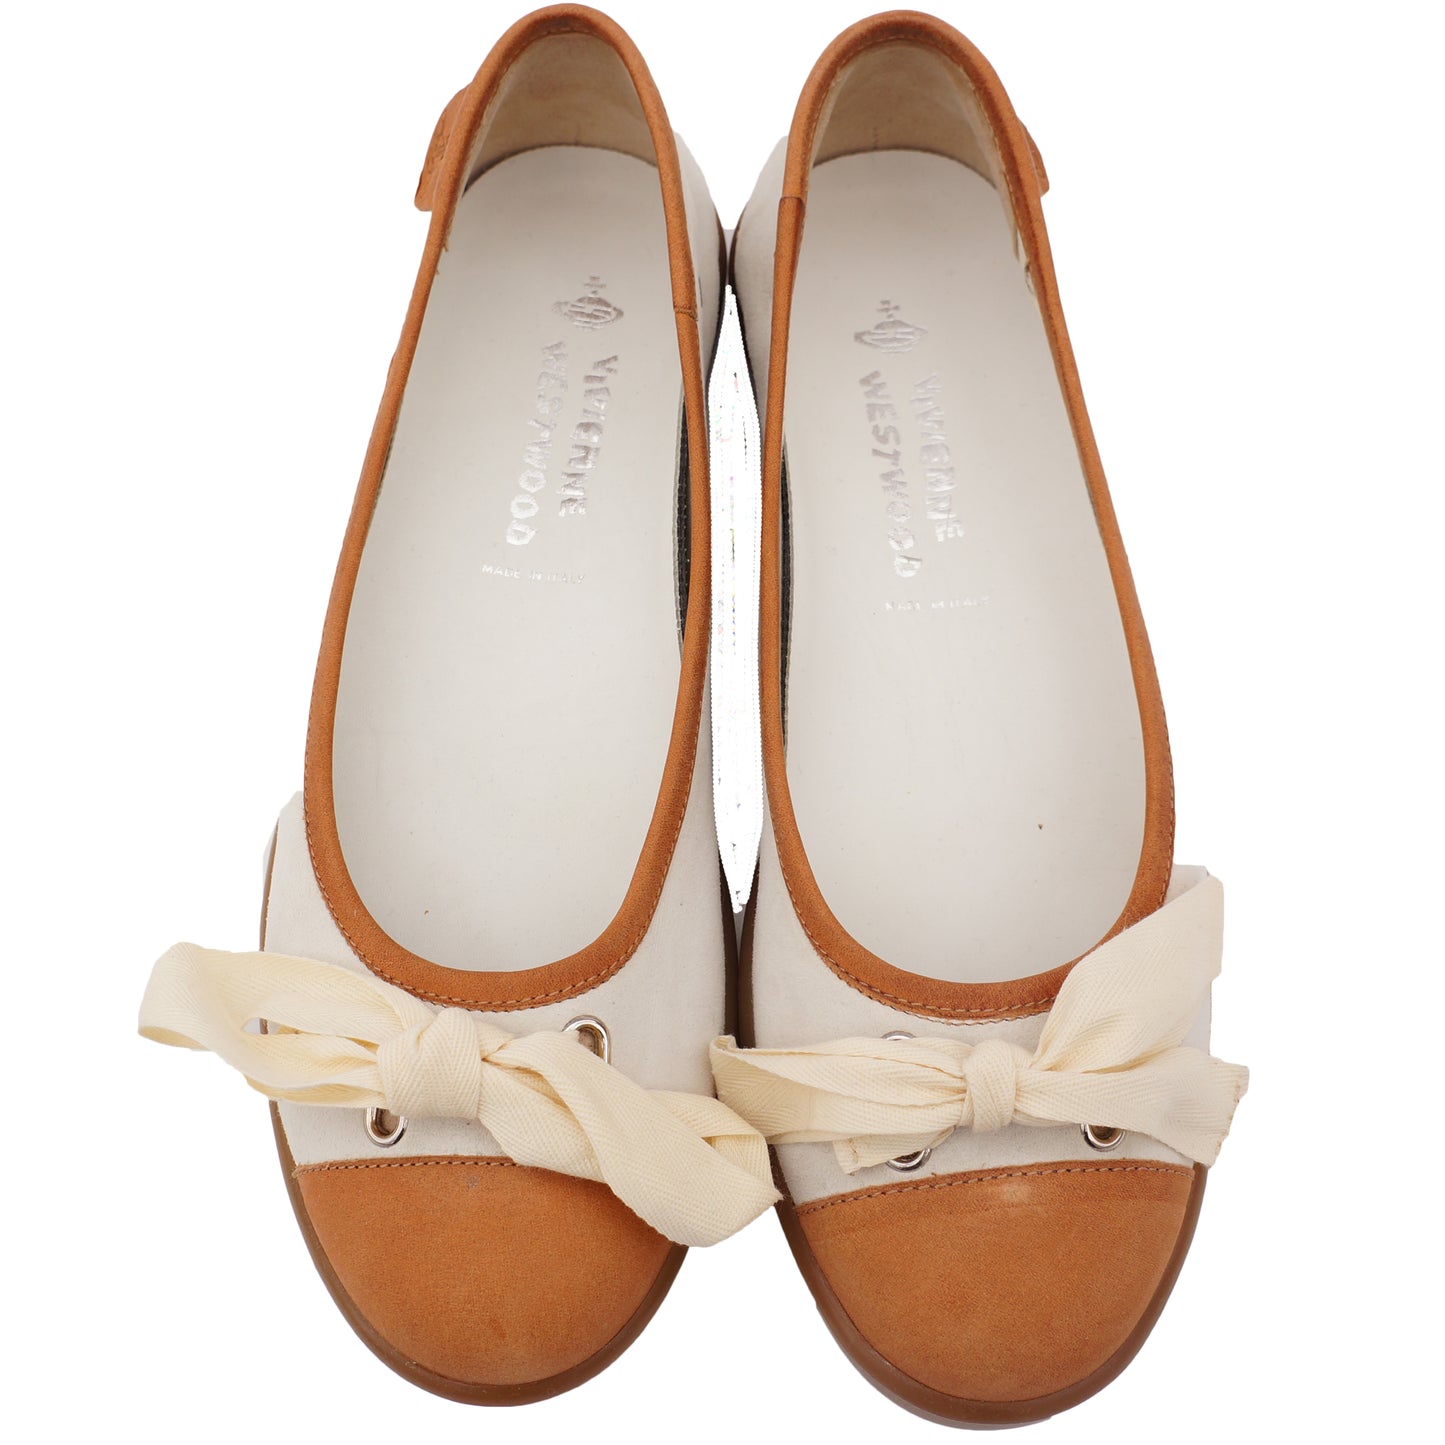 VIVIENNE WESTWOOD SUEDE AND LEATHER FLATS - leefluxury.com